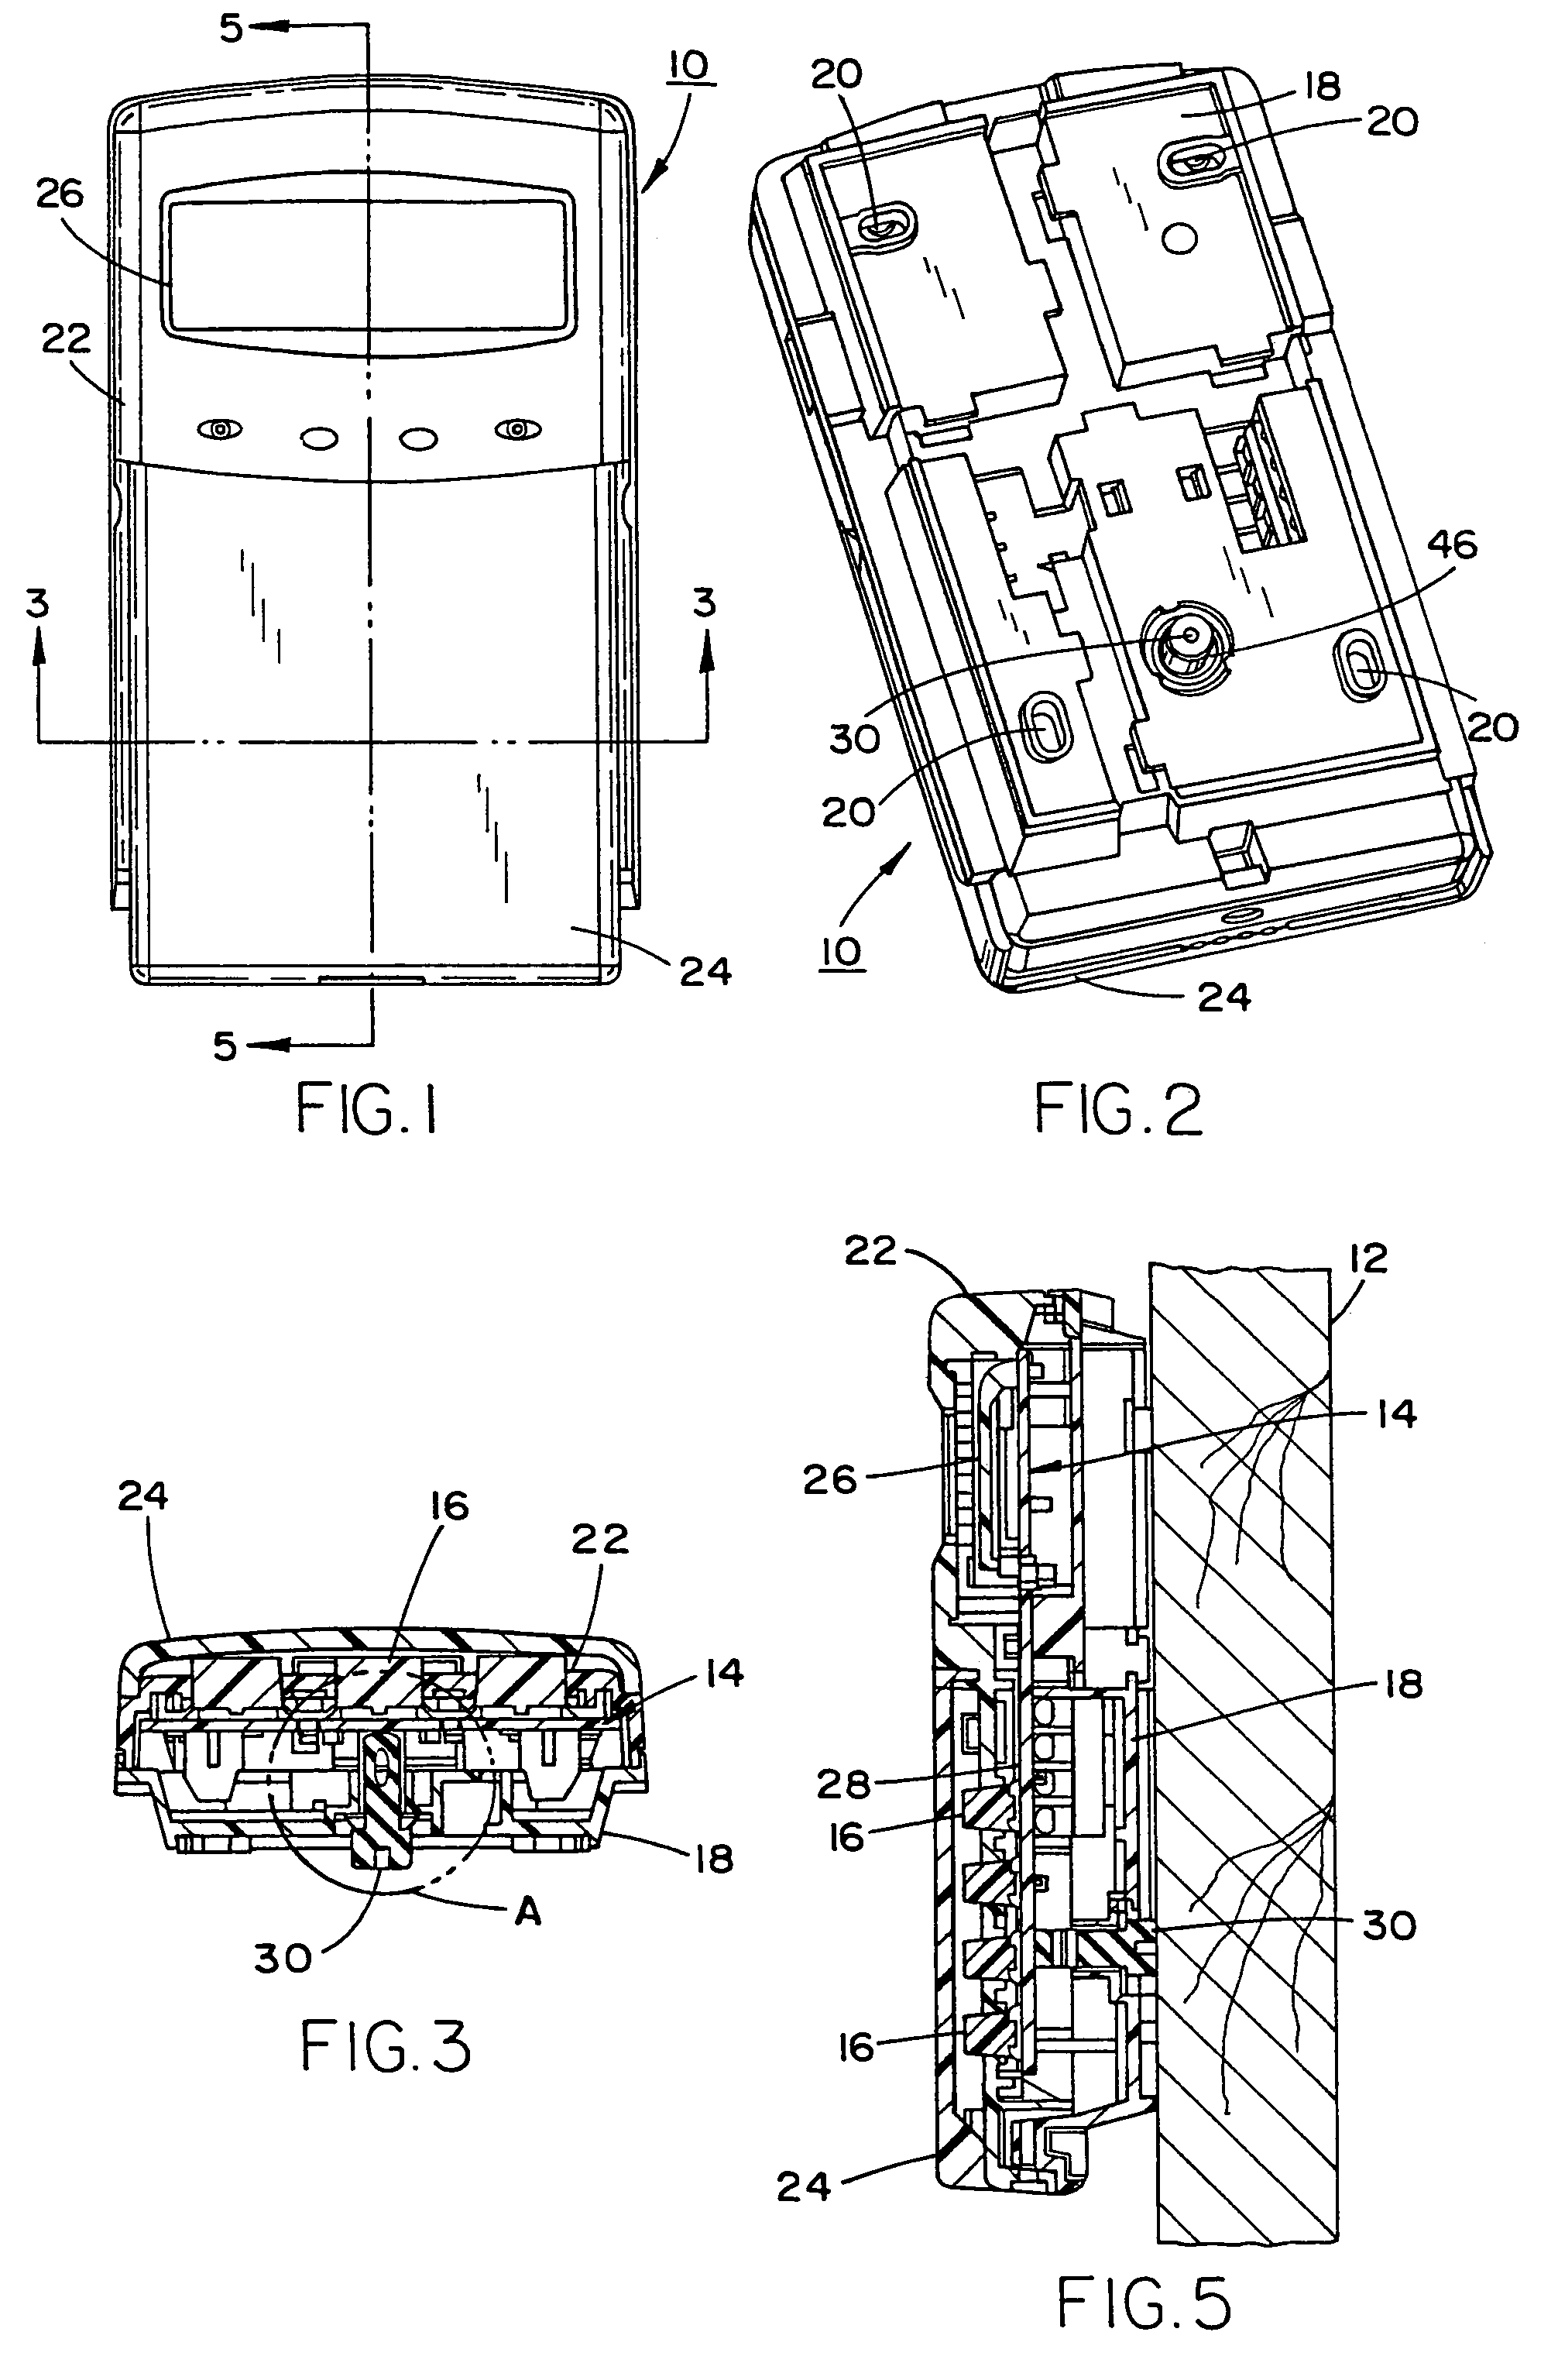 Conductive tamper switch for security devices